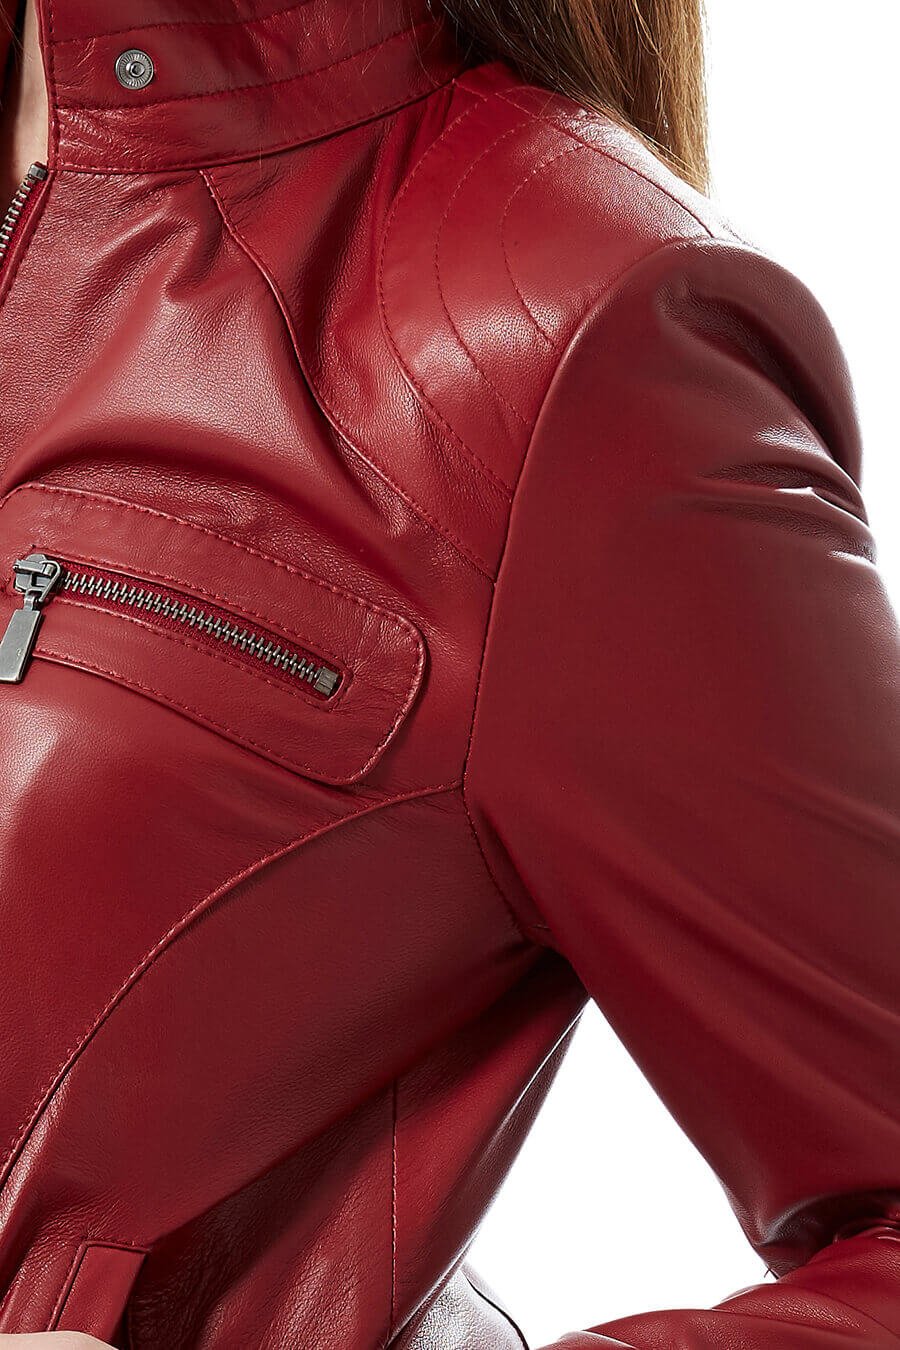 Agnese Red Leather Jacket